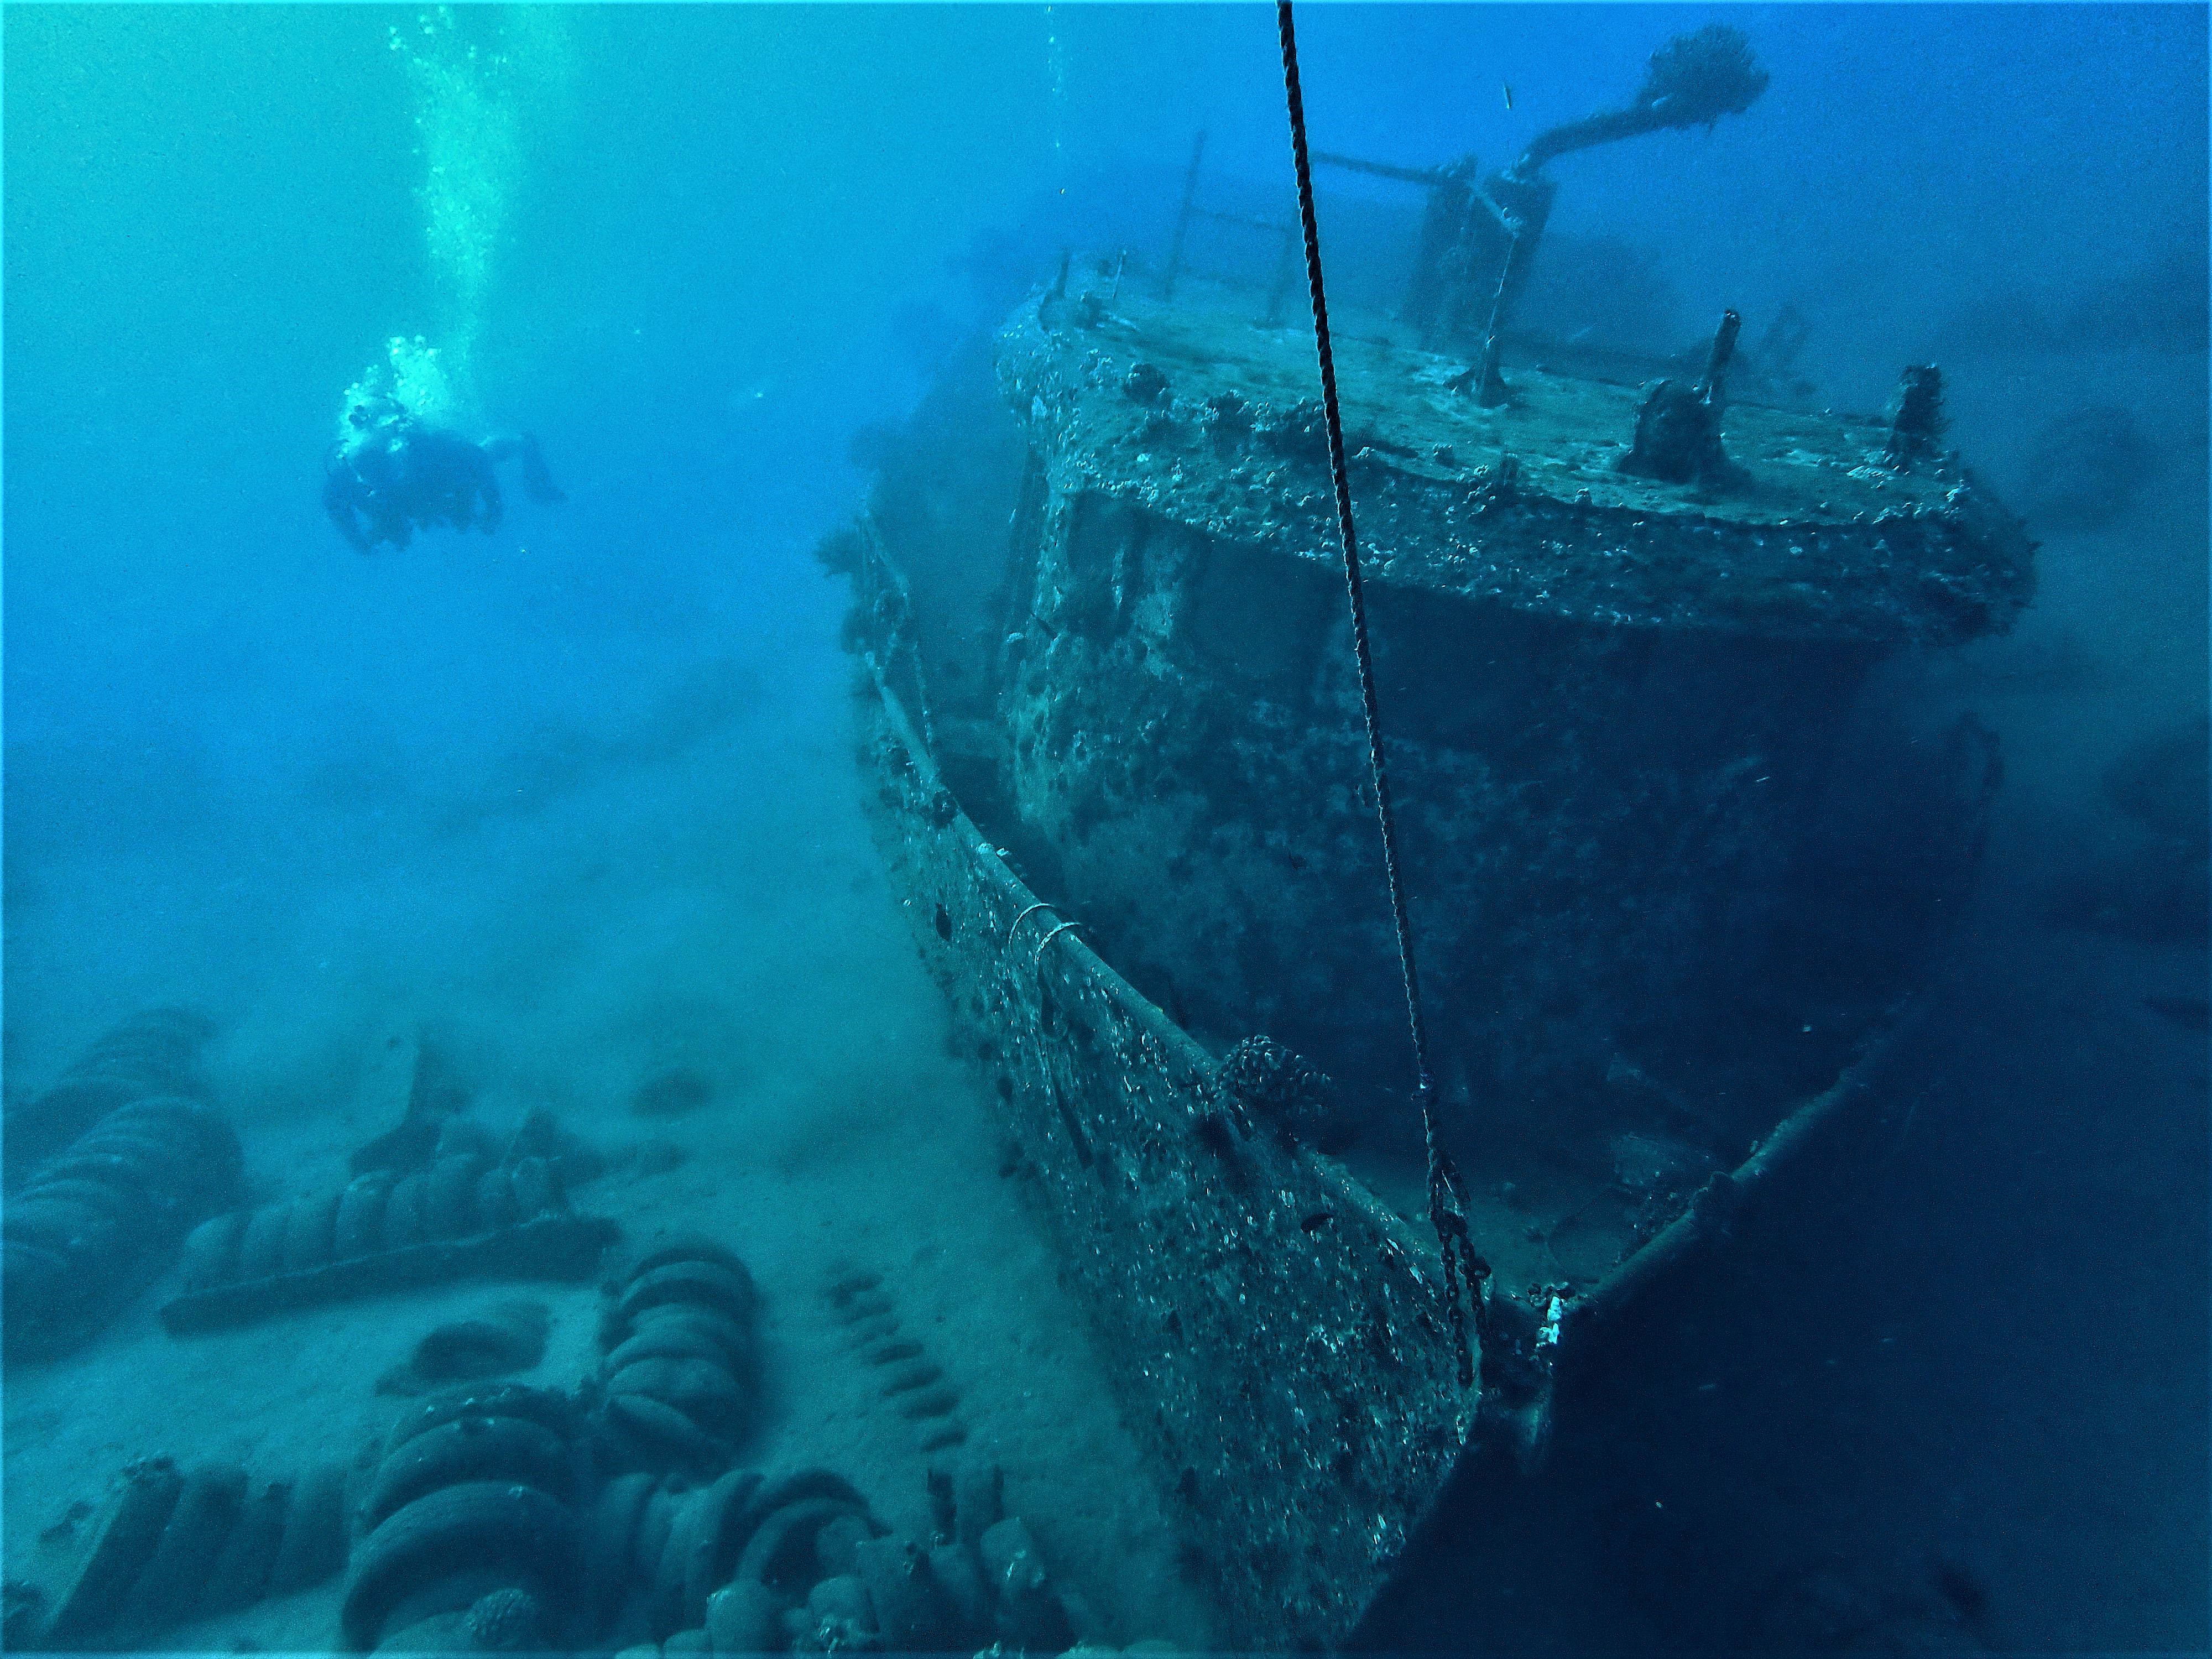 St. Anthony's WRECK